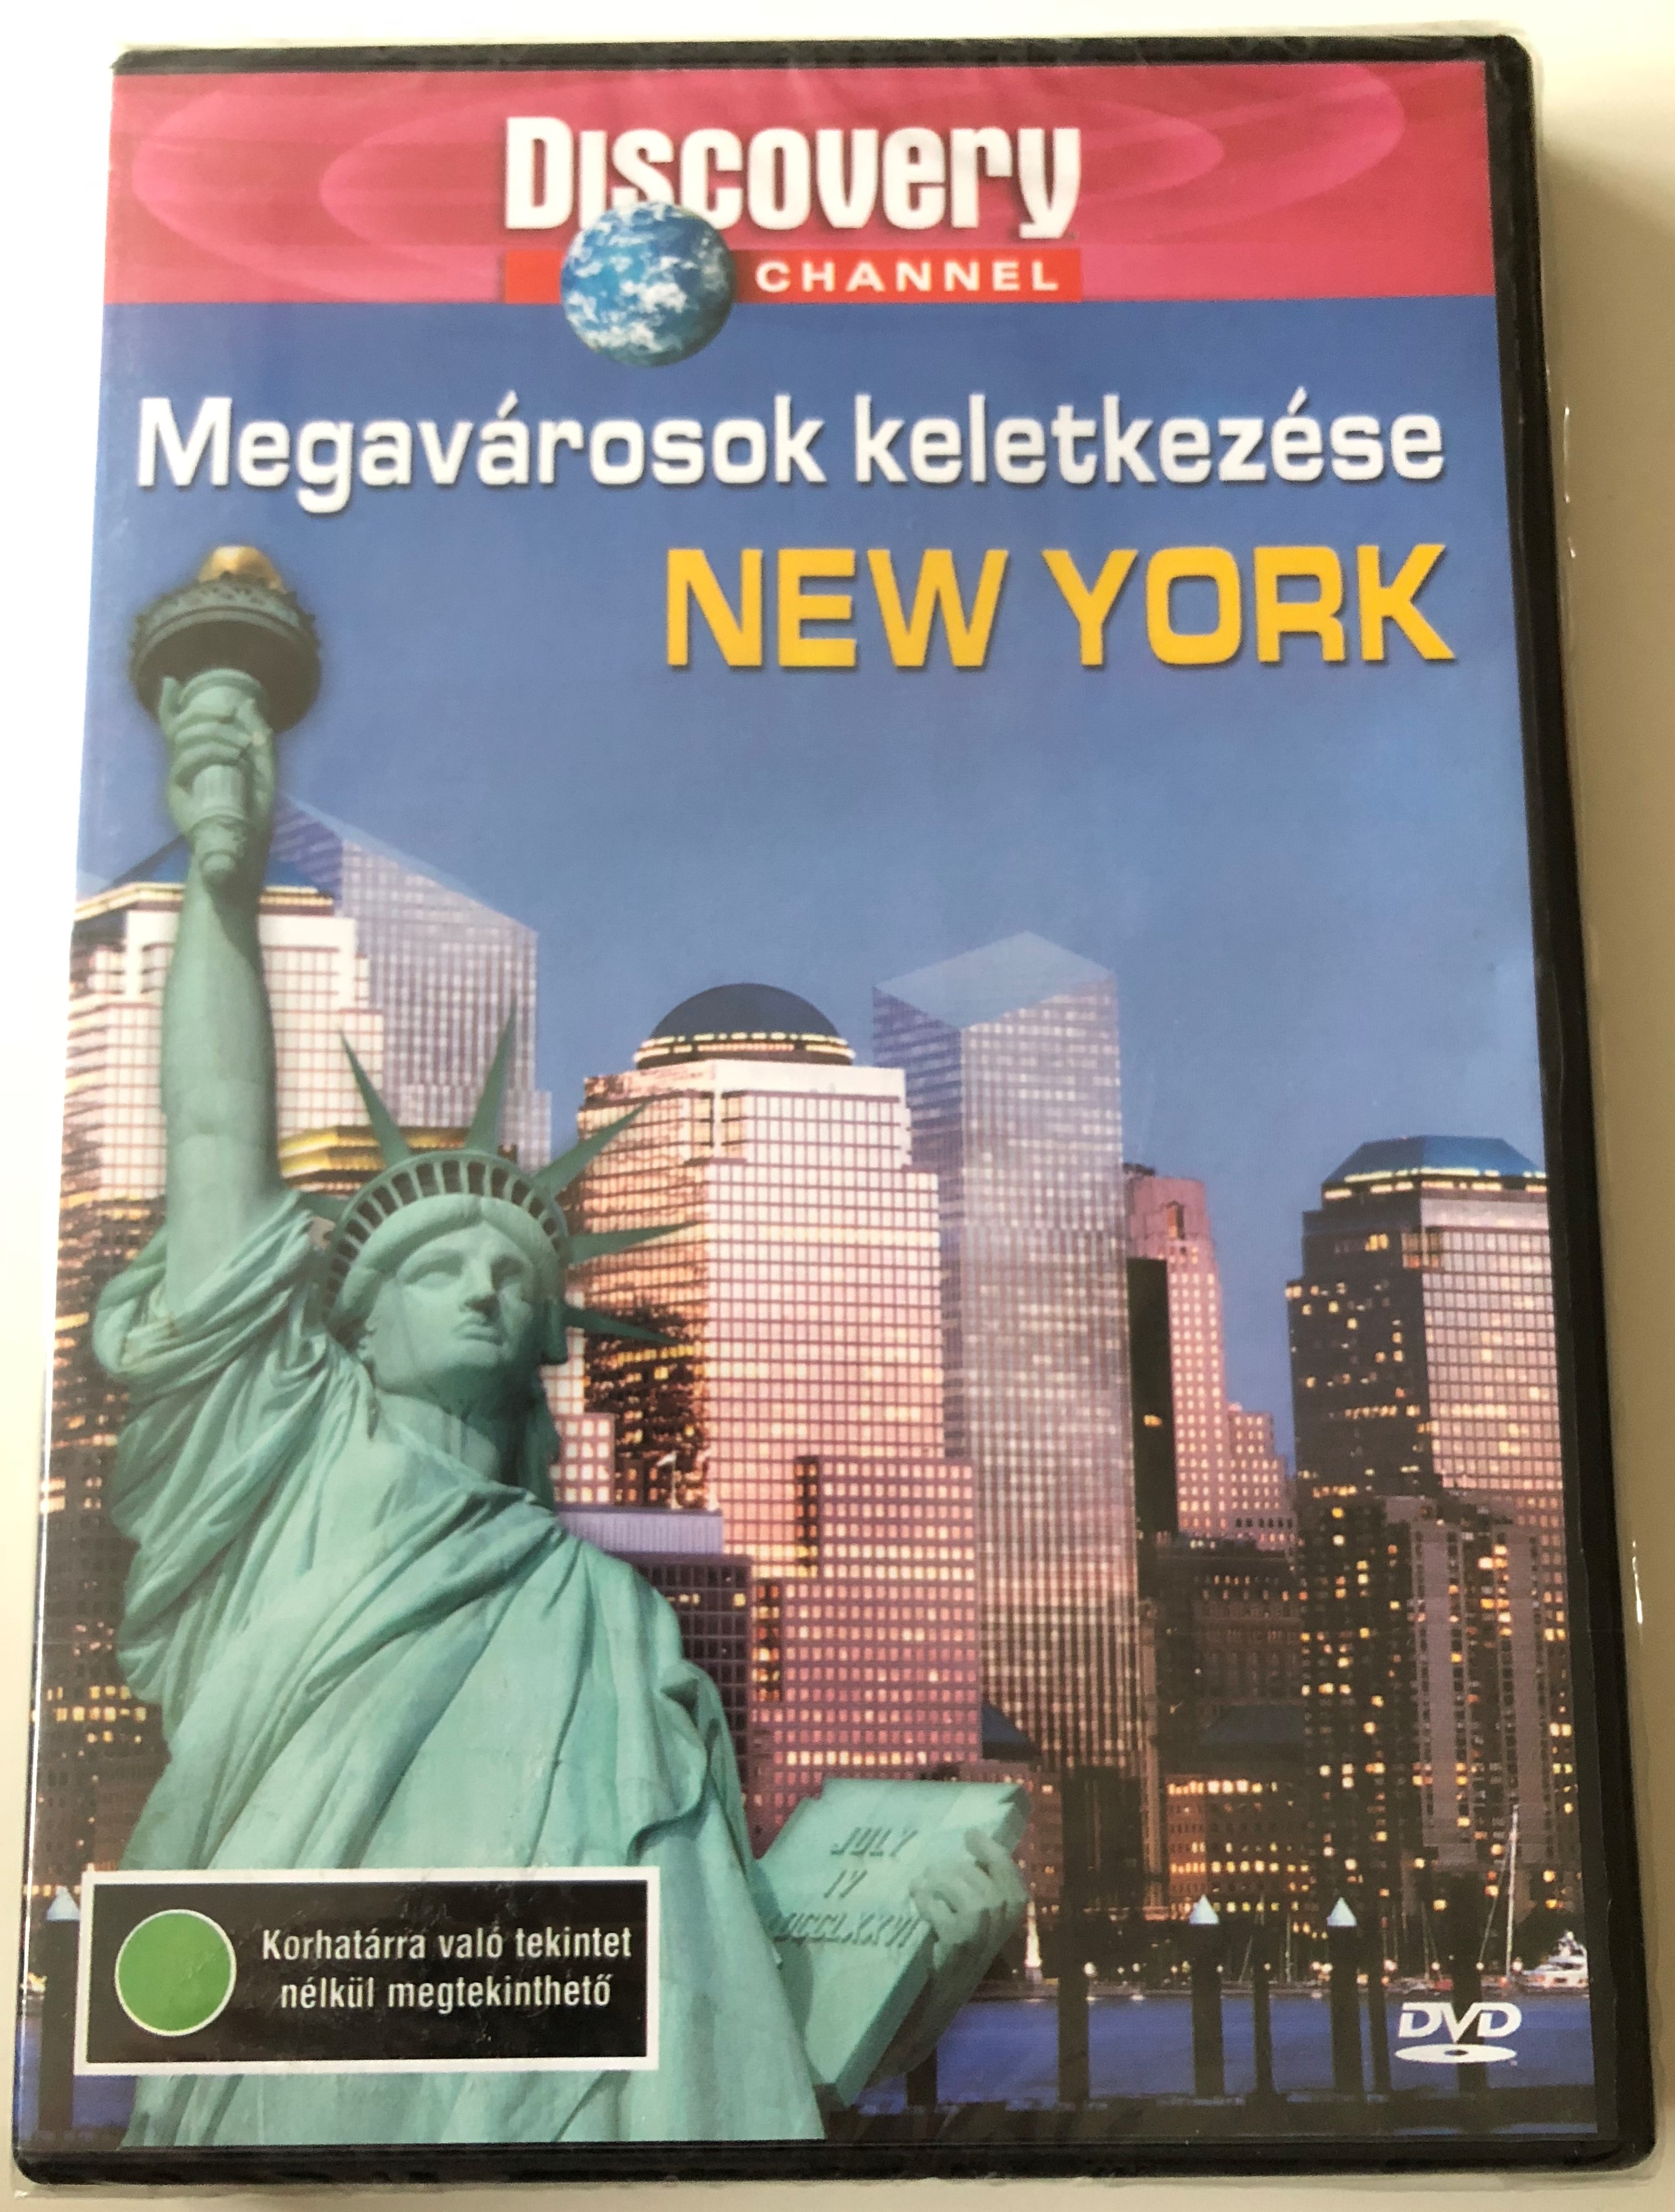 megav-rosok-keletkez-se-new-york-dvd-2003-we-built-this-city-new-york-discovery-channel-series-produced-and-directed-by-alexander-marengo-1-.jpg